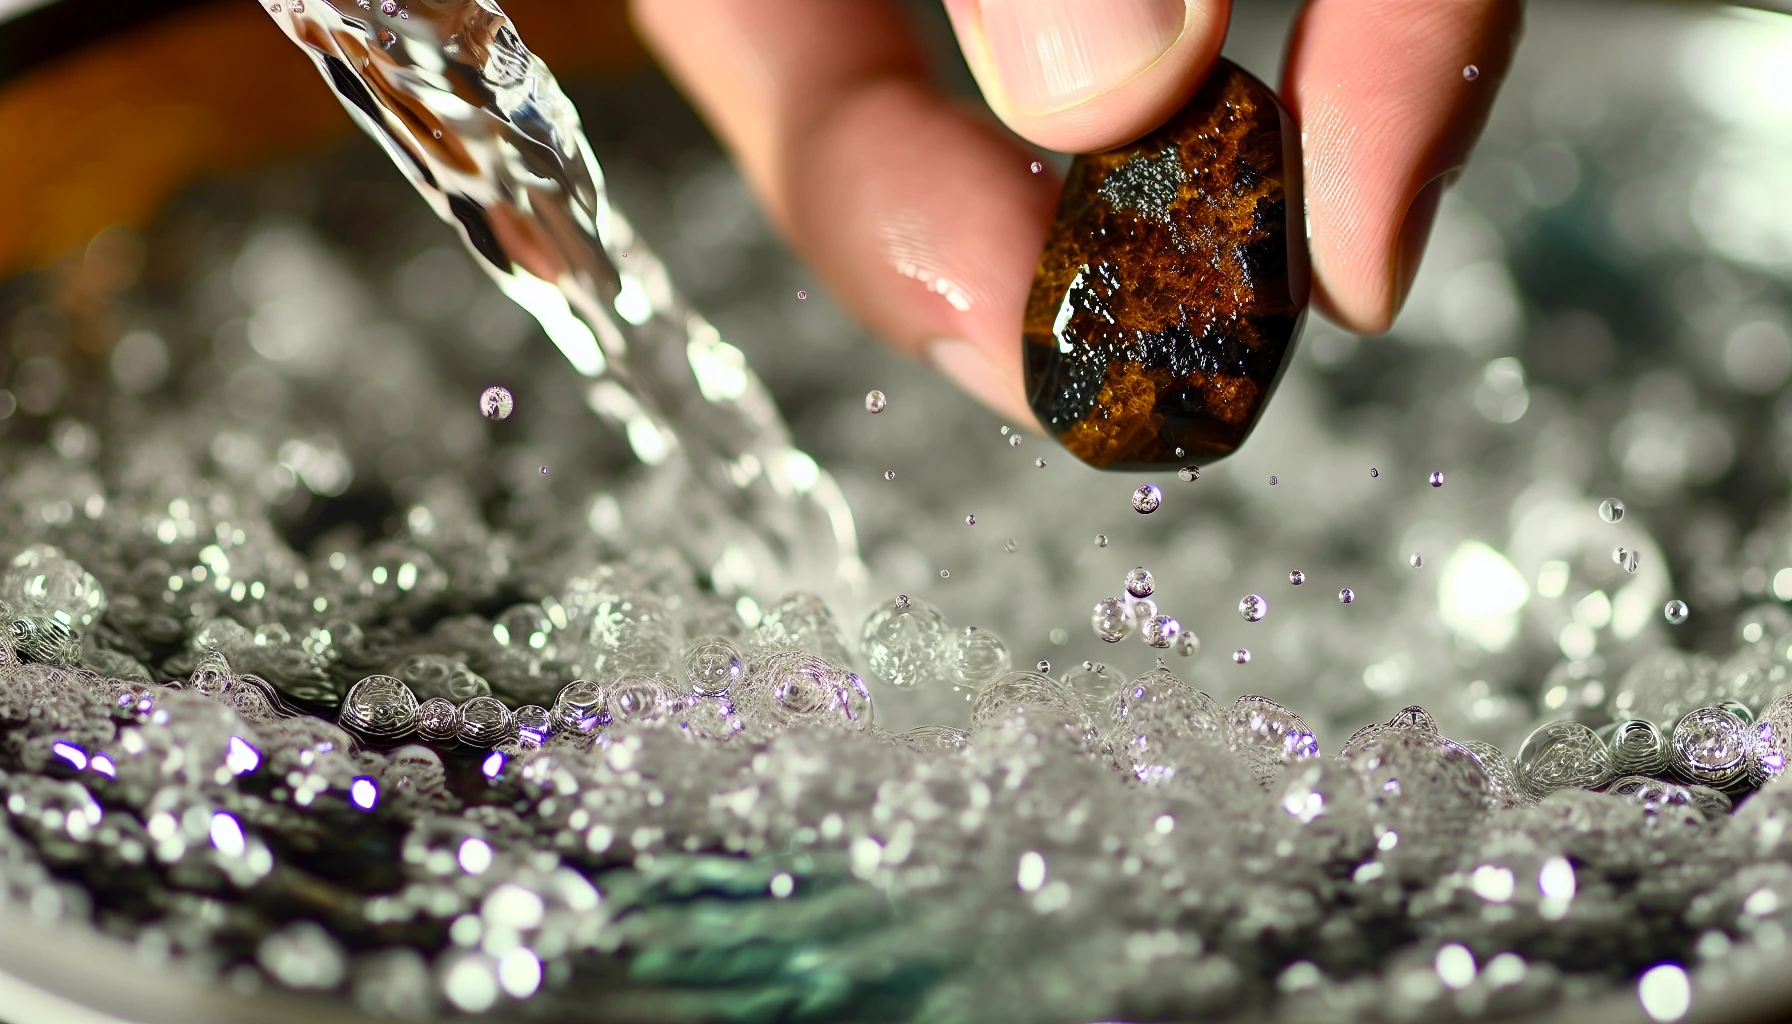 Tiger's Eye stone being cleansed under running water